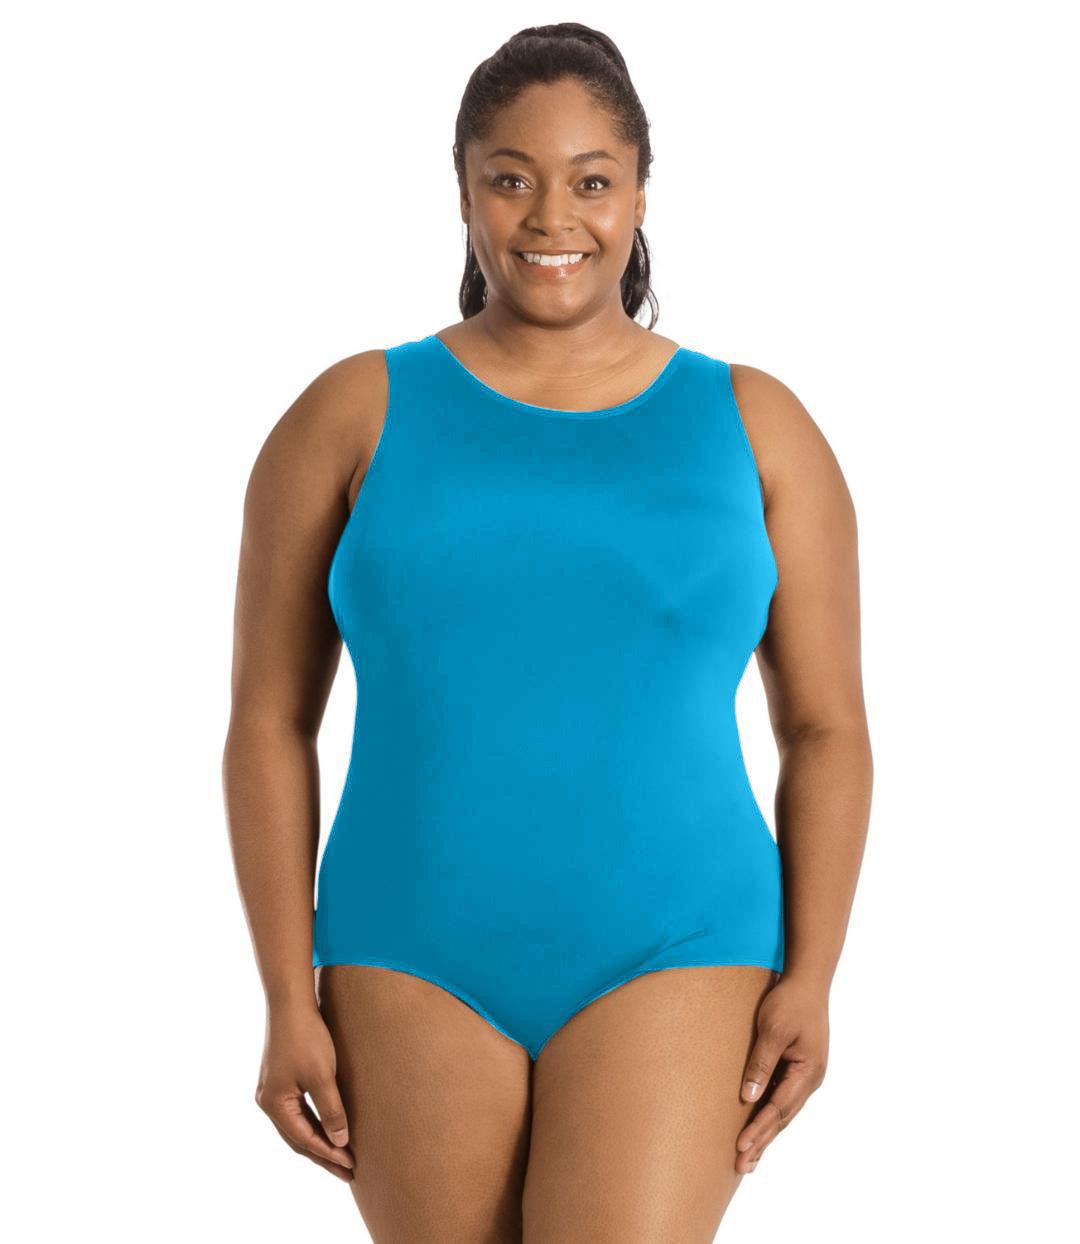 Plus size woman, facing front, wearing JunoActive plus size QuikEnergy Spa Suit Turquoise. The suit is solid Turquoise, has a scoop neckline and conservative leg opening.